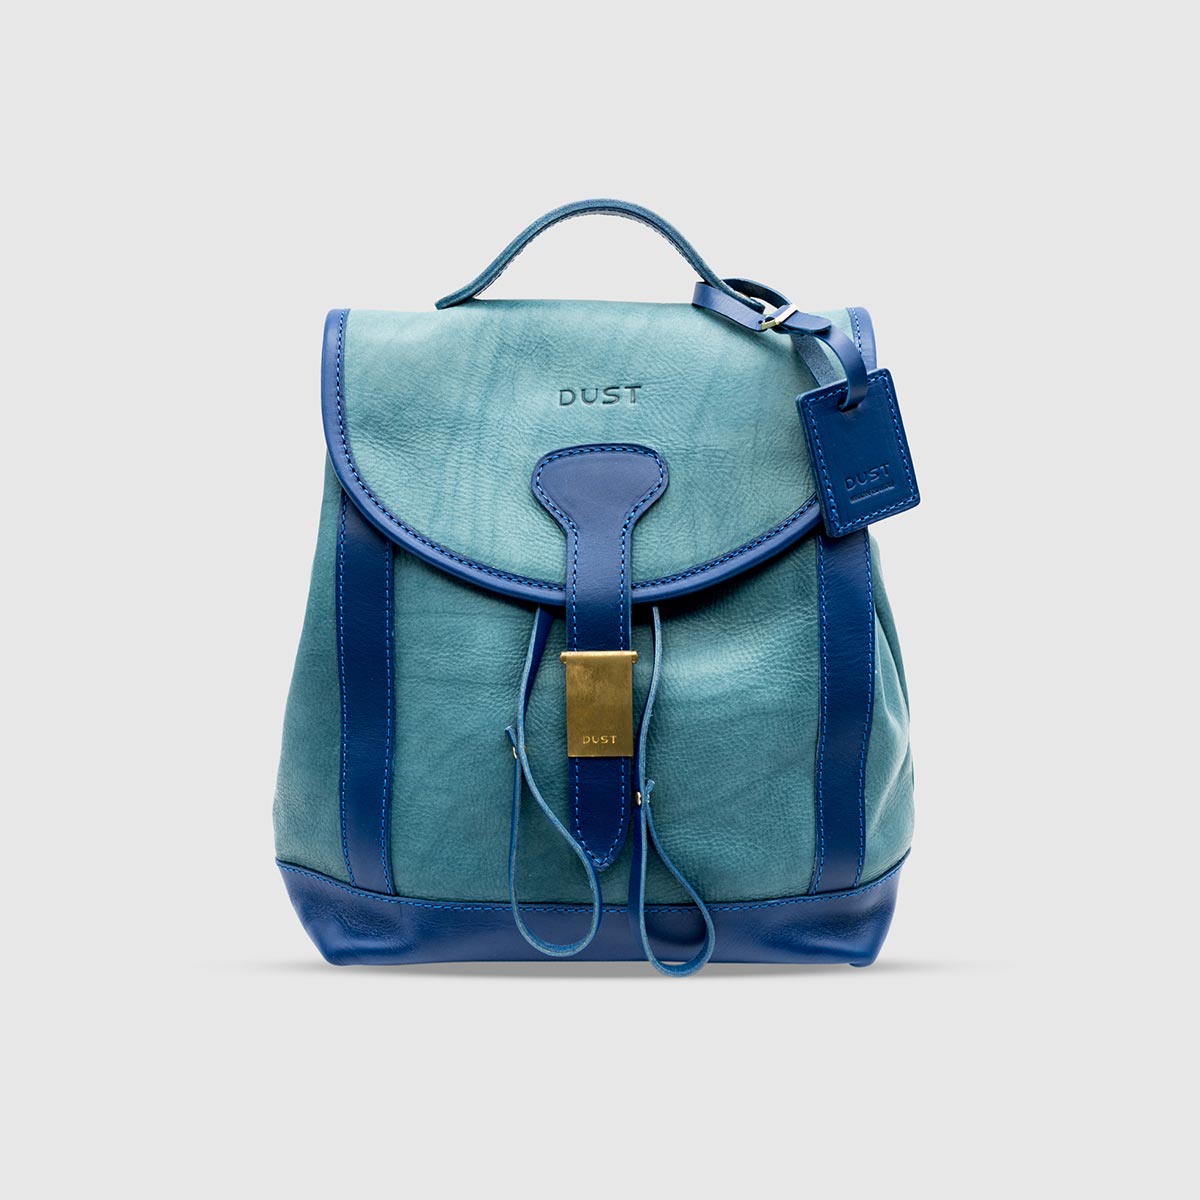 Vegetable Tumbled Leather Backpack – Light Blue Leather The Dust on sale 2022